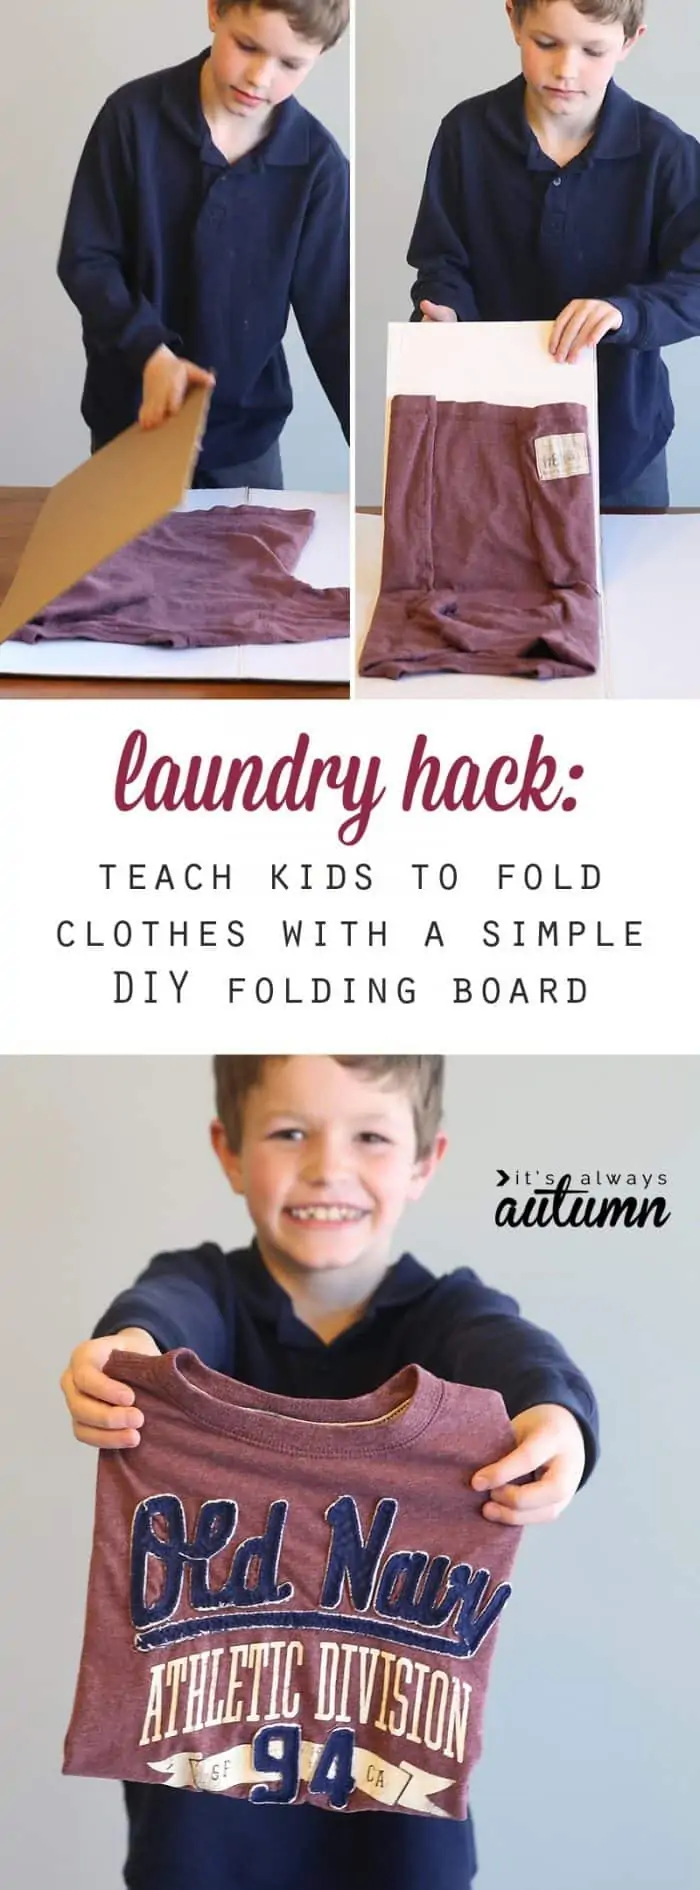 laundry-hack-kids-how-to-teach-children-to-fold-laundry-diy-folding-board-1